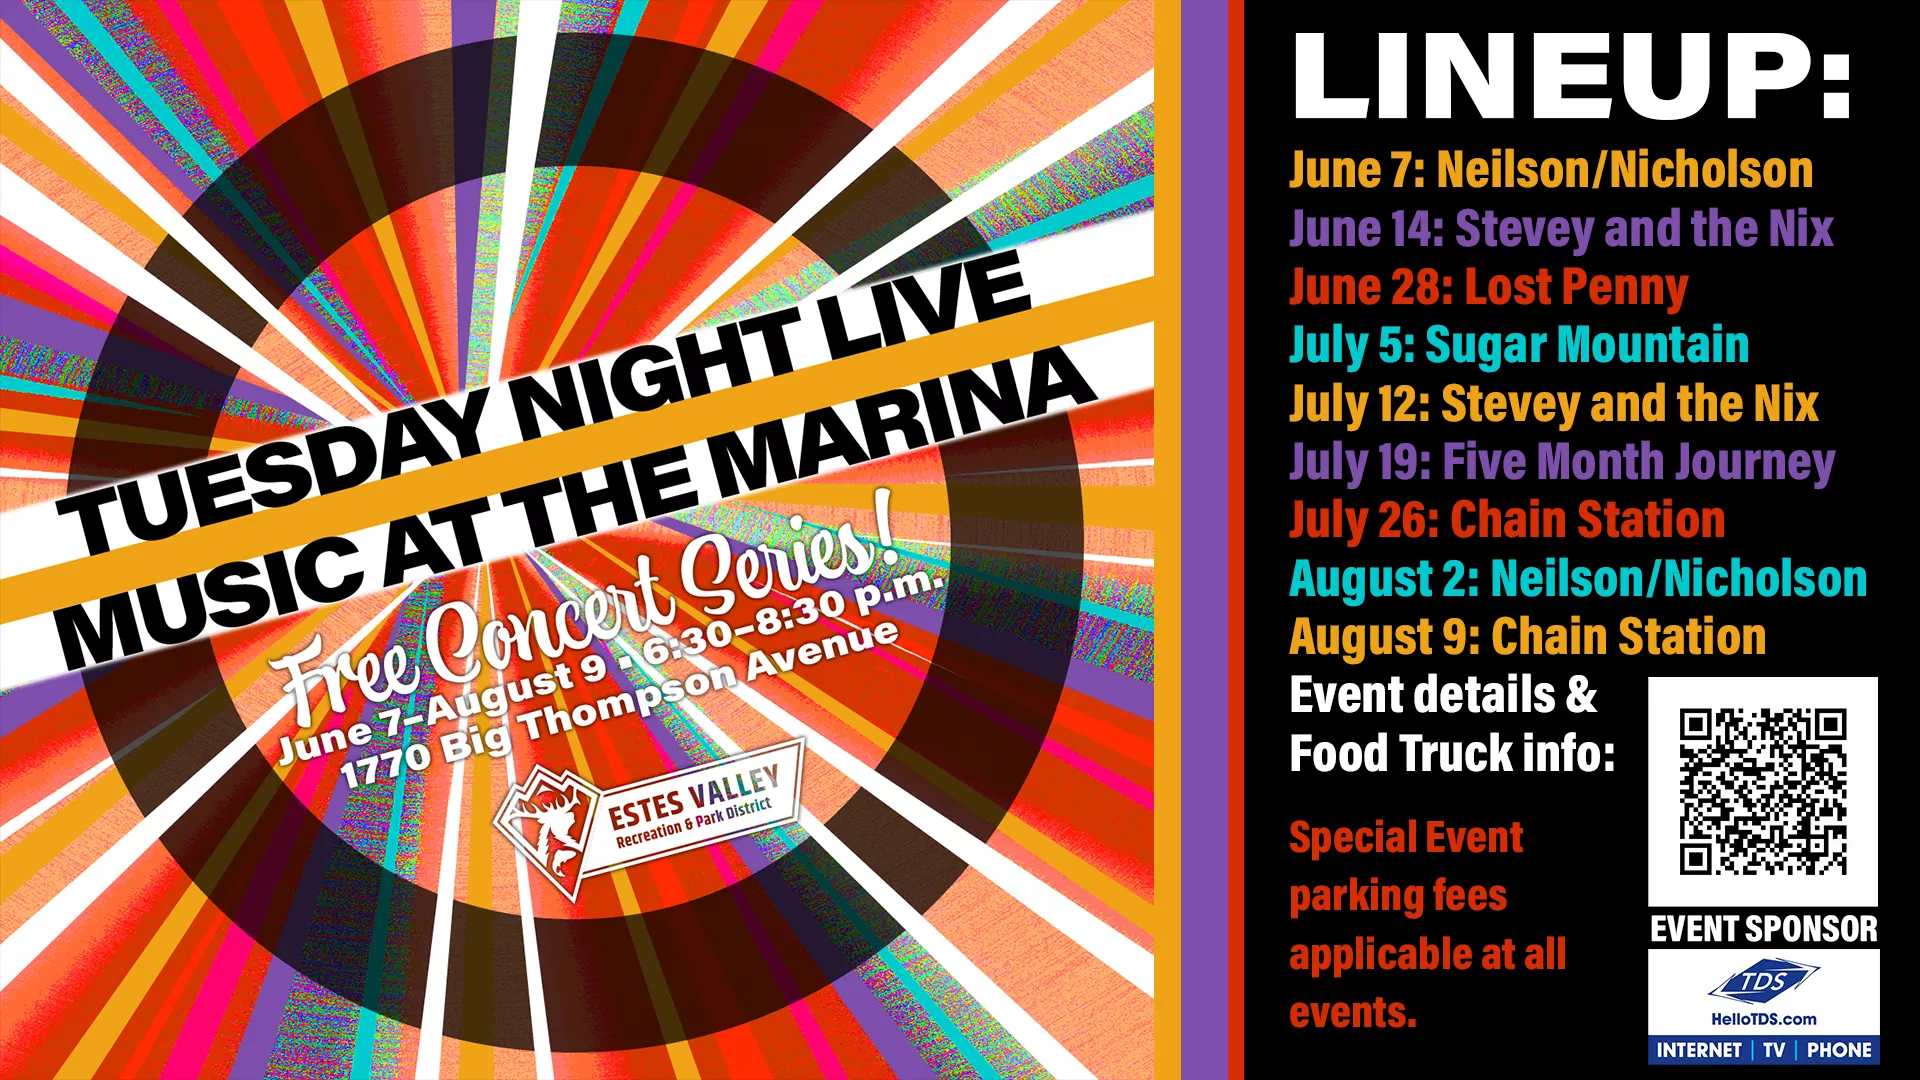 Tuesday Night Music at the Marina Concert Series